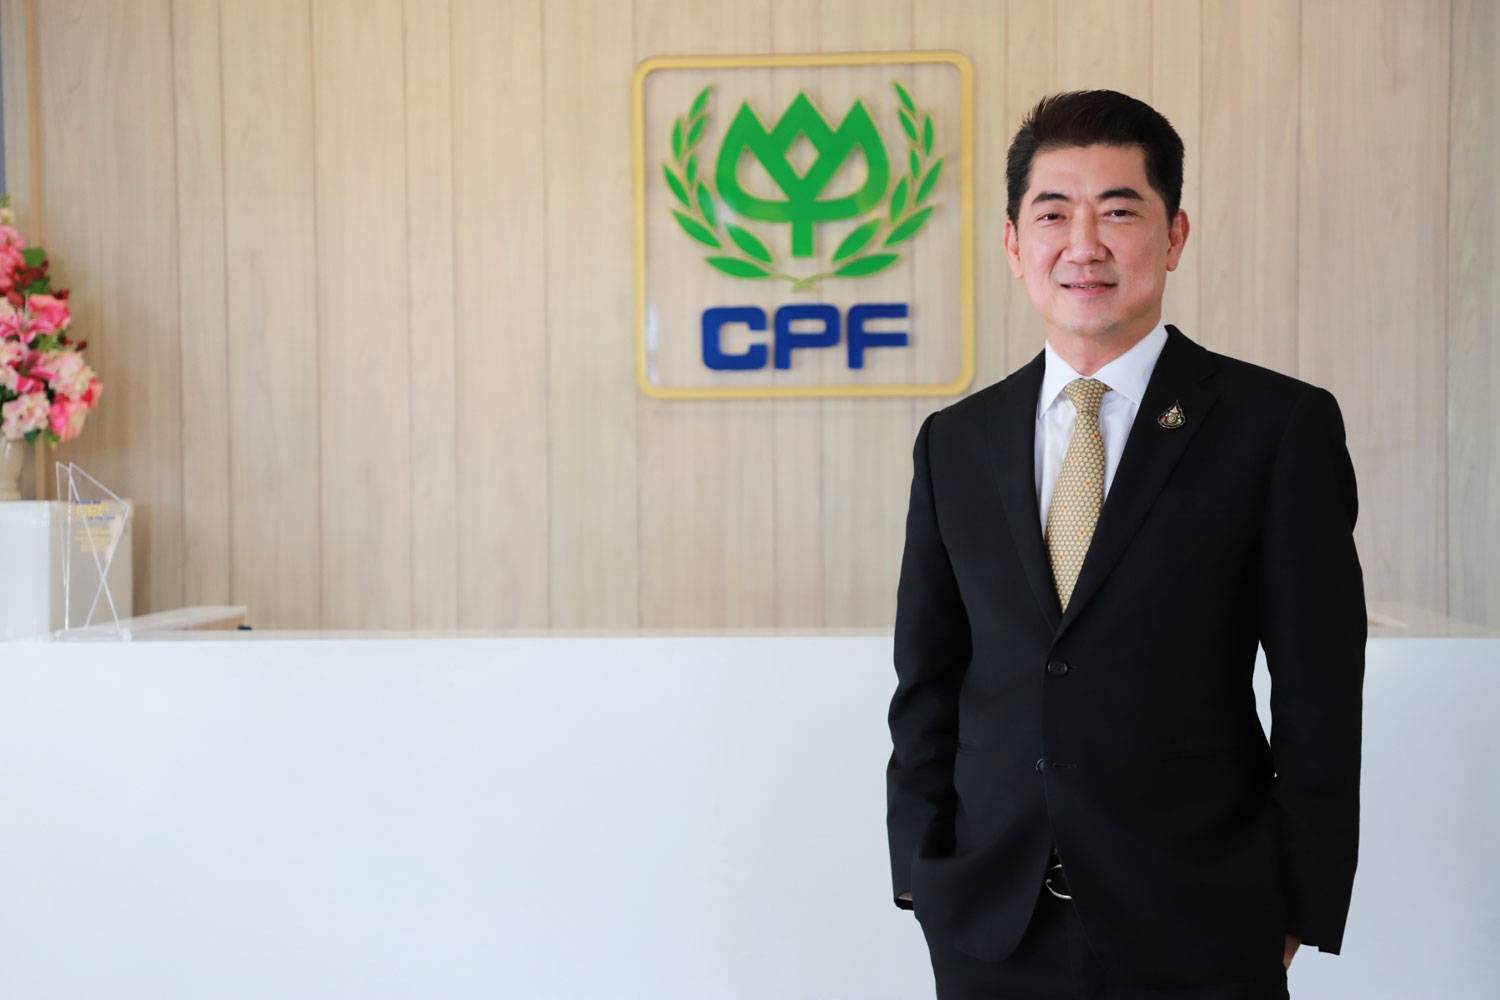 Learn about CPF Global Food Solution Public Company Limited (CPFGS), a subsidiary of Charoen Pokphand Foods (CPF), as it prepares for an initial public offering (IPO). With a focus on distributing fresh and processed food products in Thailand, CPFGS has formed a strategic joint venture with Uoriki Co., a leading fish retailer in Japan. Discover how this partnership aims to import premium fish products to Thailand, open retail outlets, and provide Thai consumers with a wide range of seafood options. This collaboration combines CPF's distribution expertise with Uoriki's experience in the fresh fish and seafood market, highlighting their potential for success in the industry.